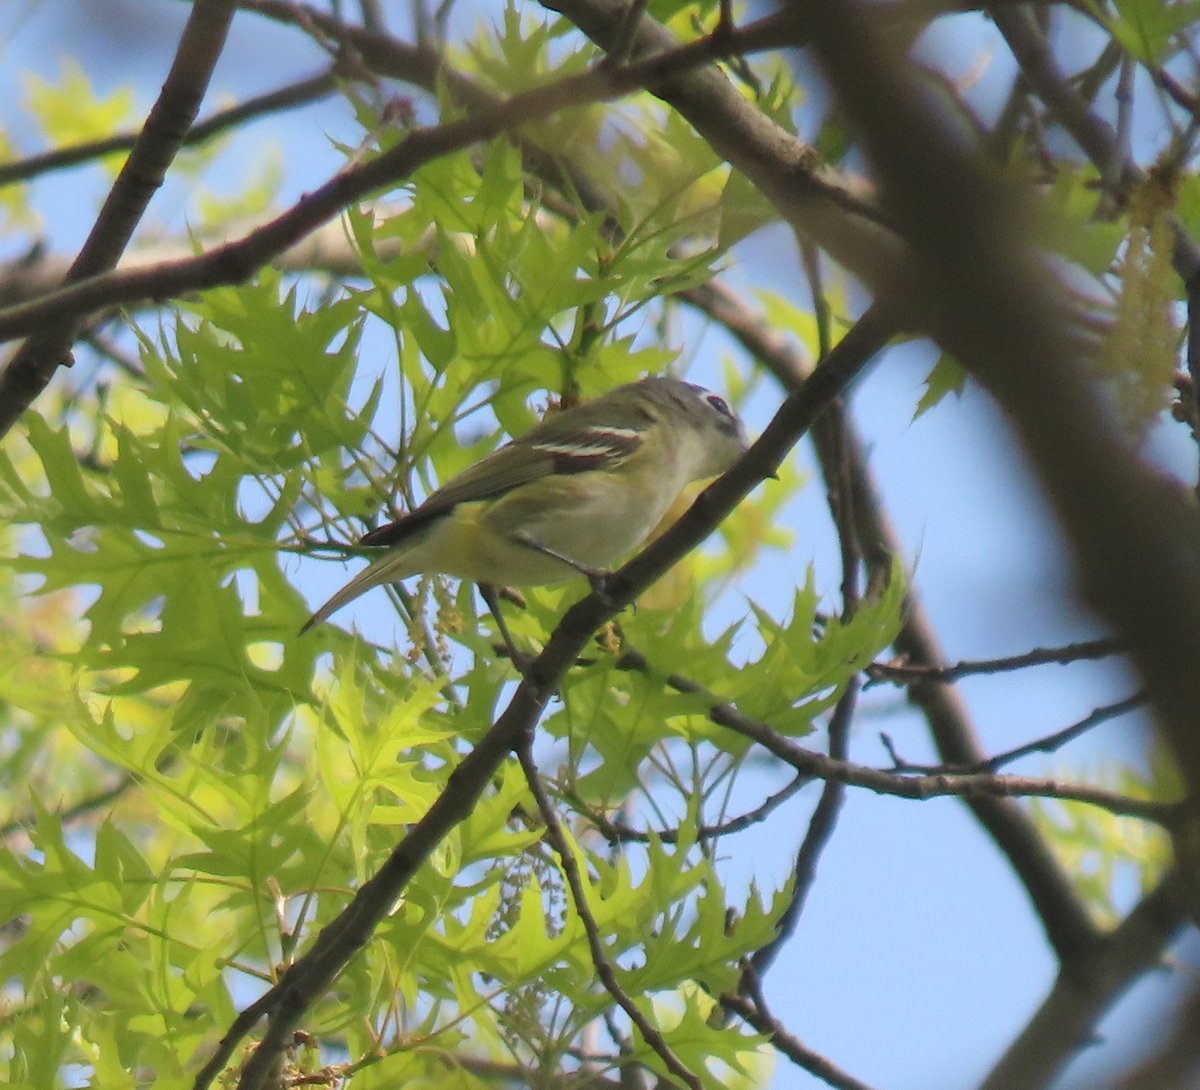 Birding with @AhraMiku23688 in Flushing Meadows Park-April 29, 2024. 1. Male Baltimore oriole 2. Blue-headed vireo @BirdQueens #birdcpp #AutismAcceptanceMonth #accessibility #inclusion